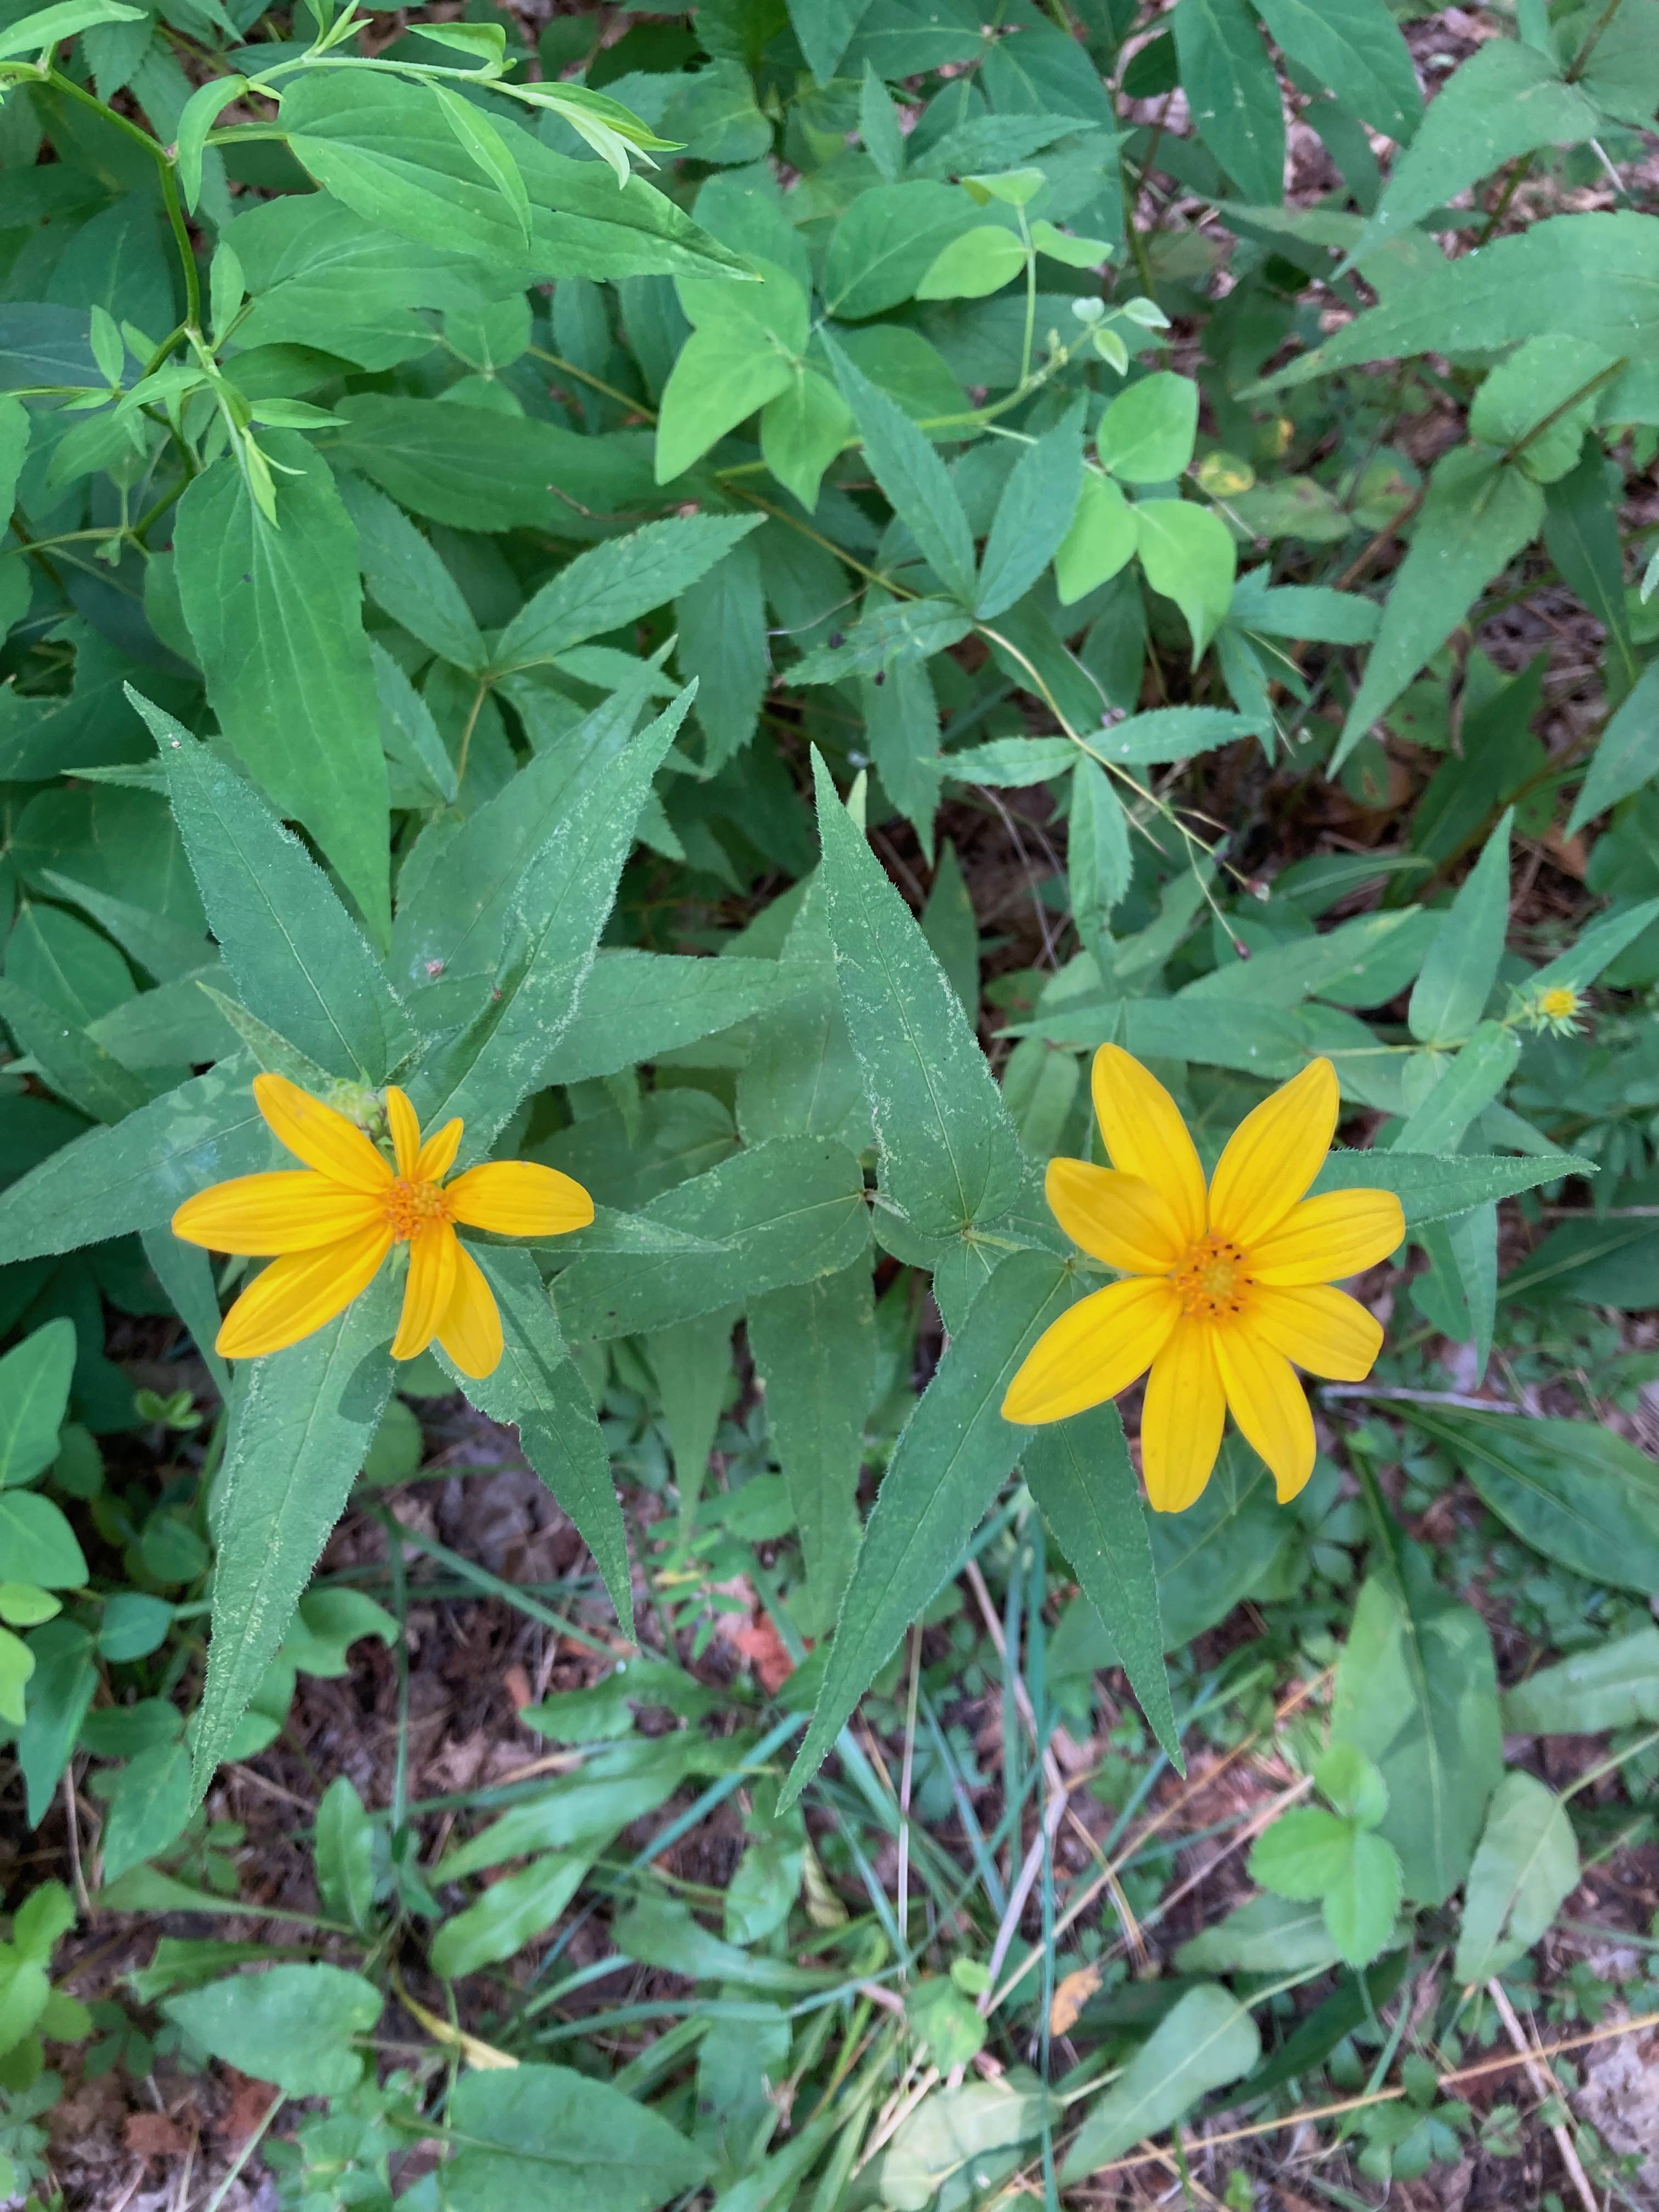 The Scientific Name is Helianthus divaricatus [= Helianthus divaricatus var. angustifolius]. You will likely hear them called Woodland sunflower, Rough sunflower. This picture shows the Sessile, opposite long-triangular shaped leaves. The leaf is trinerved, with the 2 lateral veins diverging from the midrib at the very base of the leaf. The leaf surface is rough textured. of Helianthus divaricatus [= Helianthus divaricatus var. angustifolius]